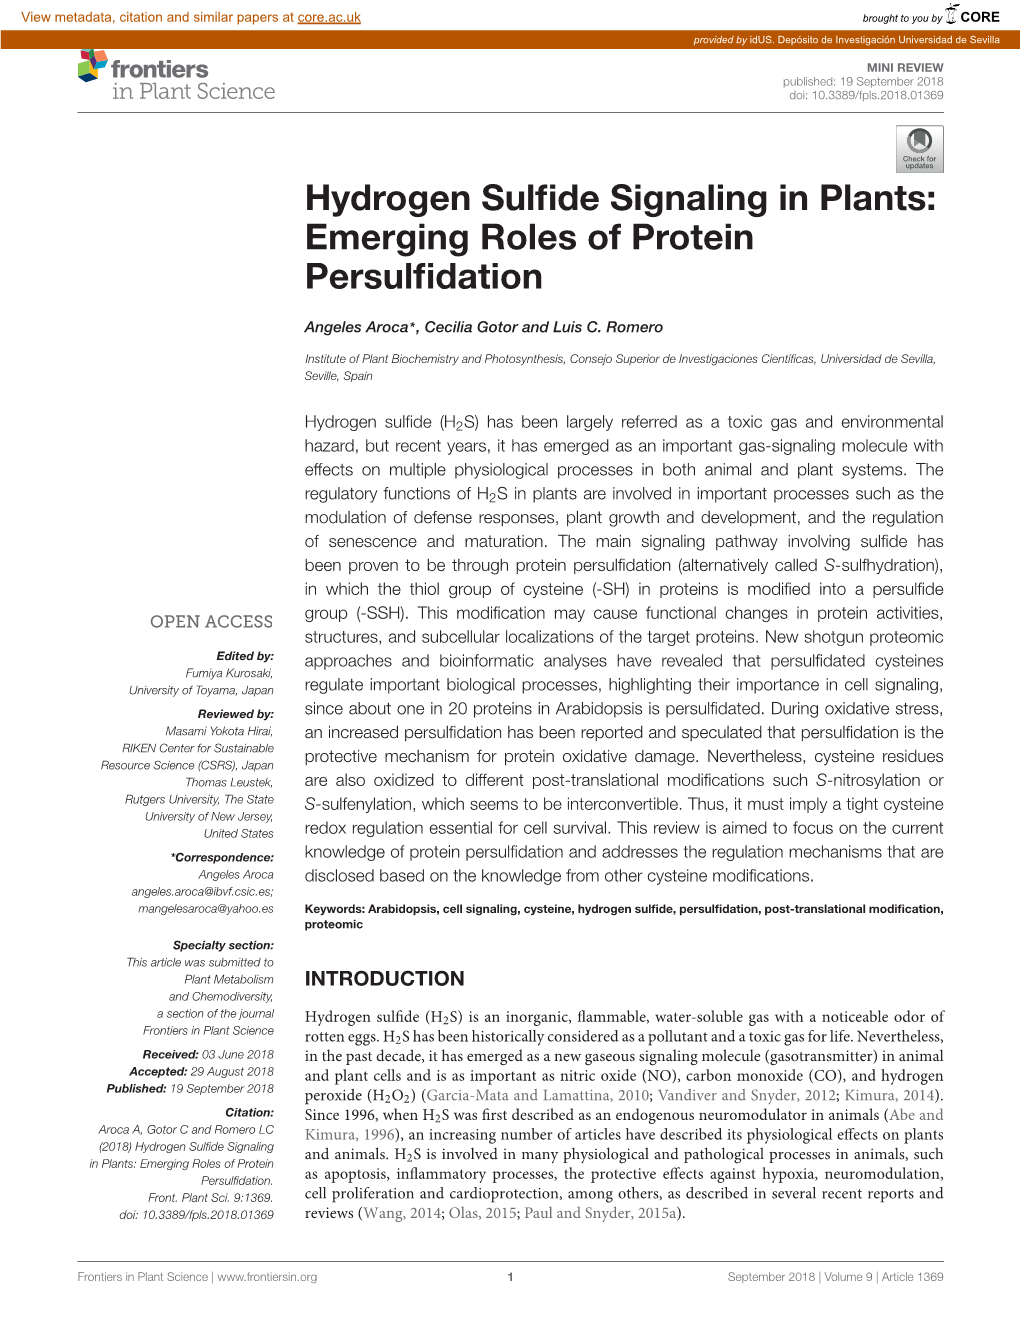 Hydrogen Sulfide Signaling in Plants: Emerging Roles of Protein